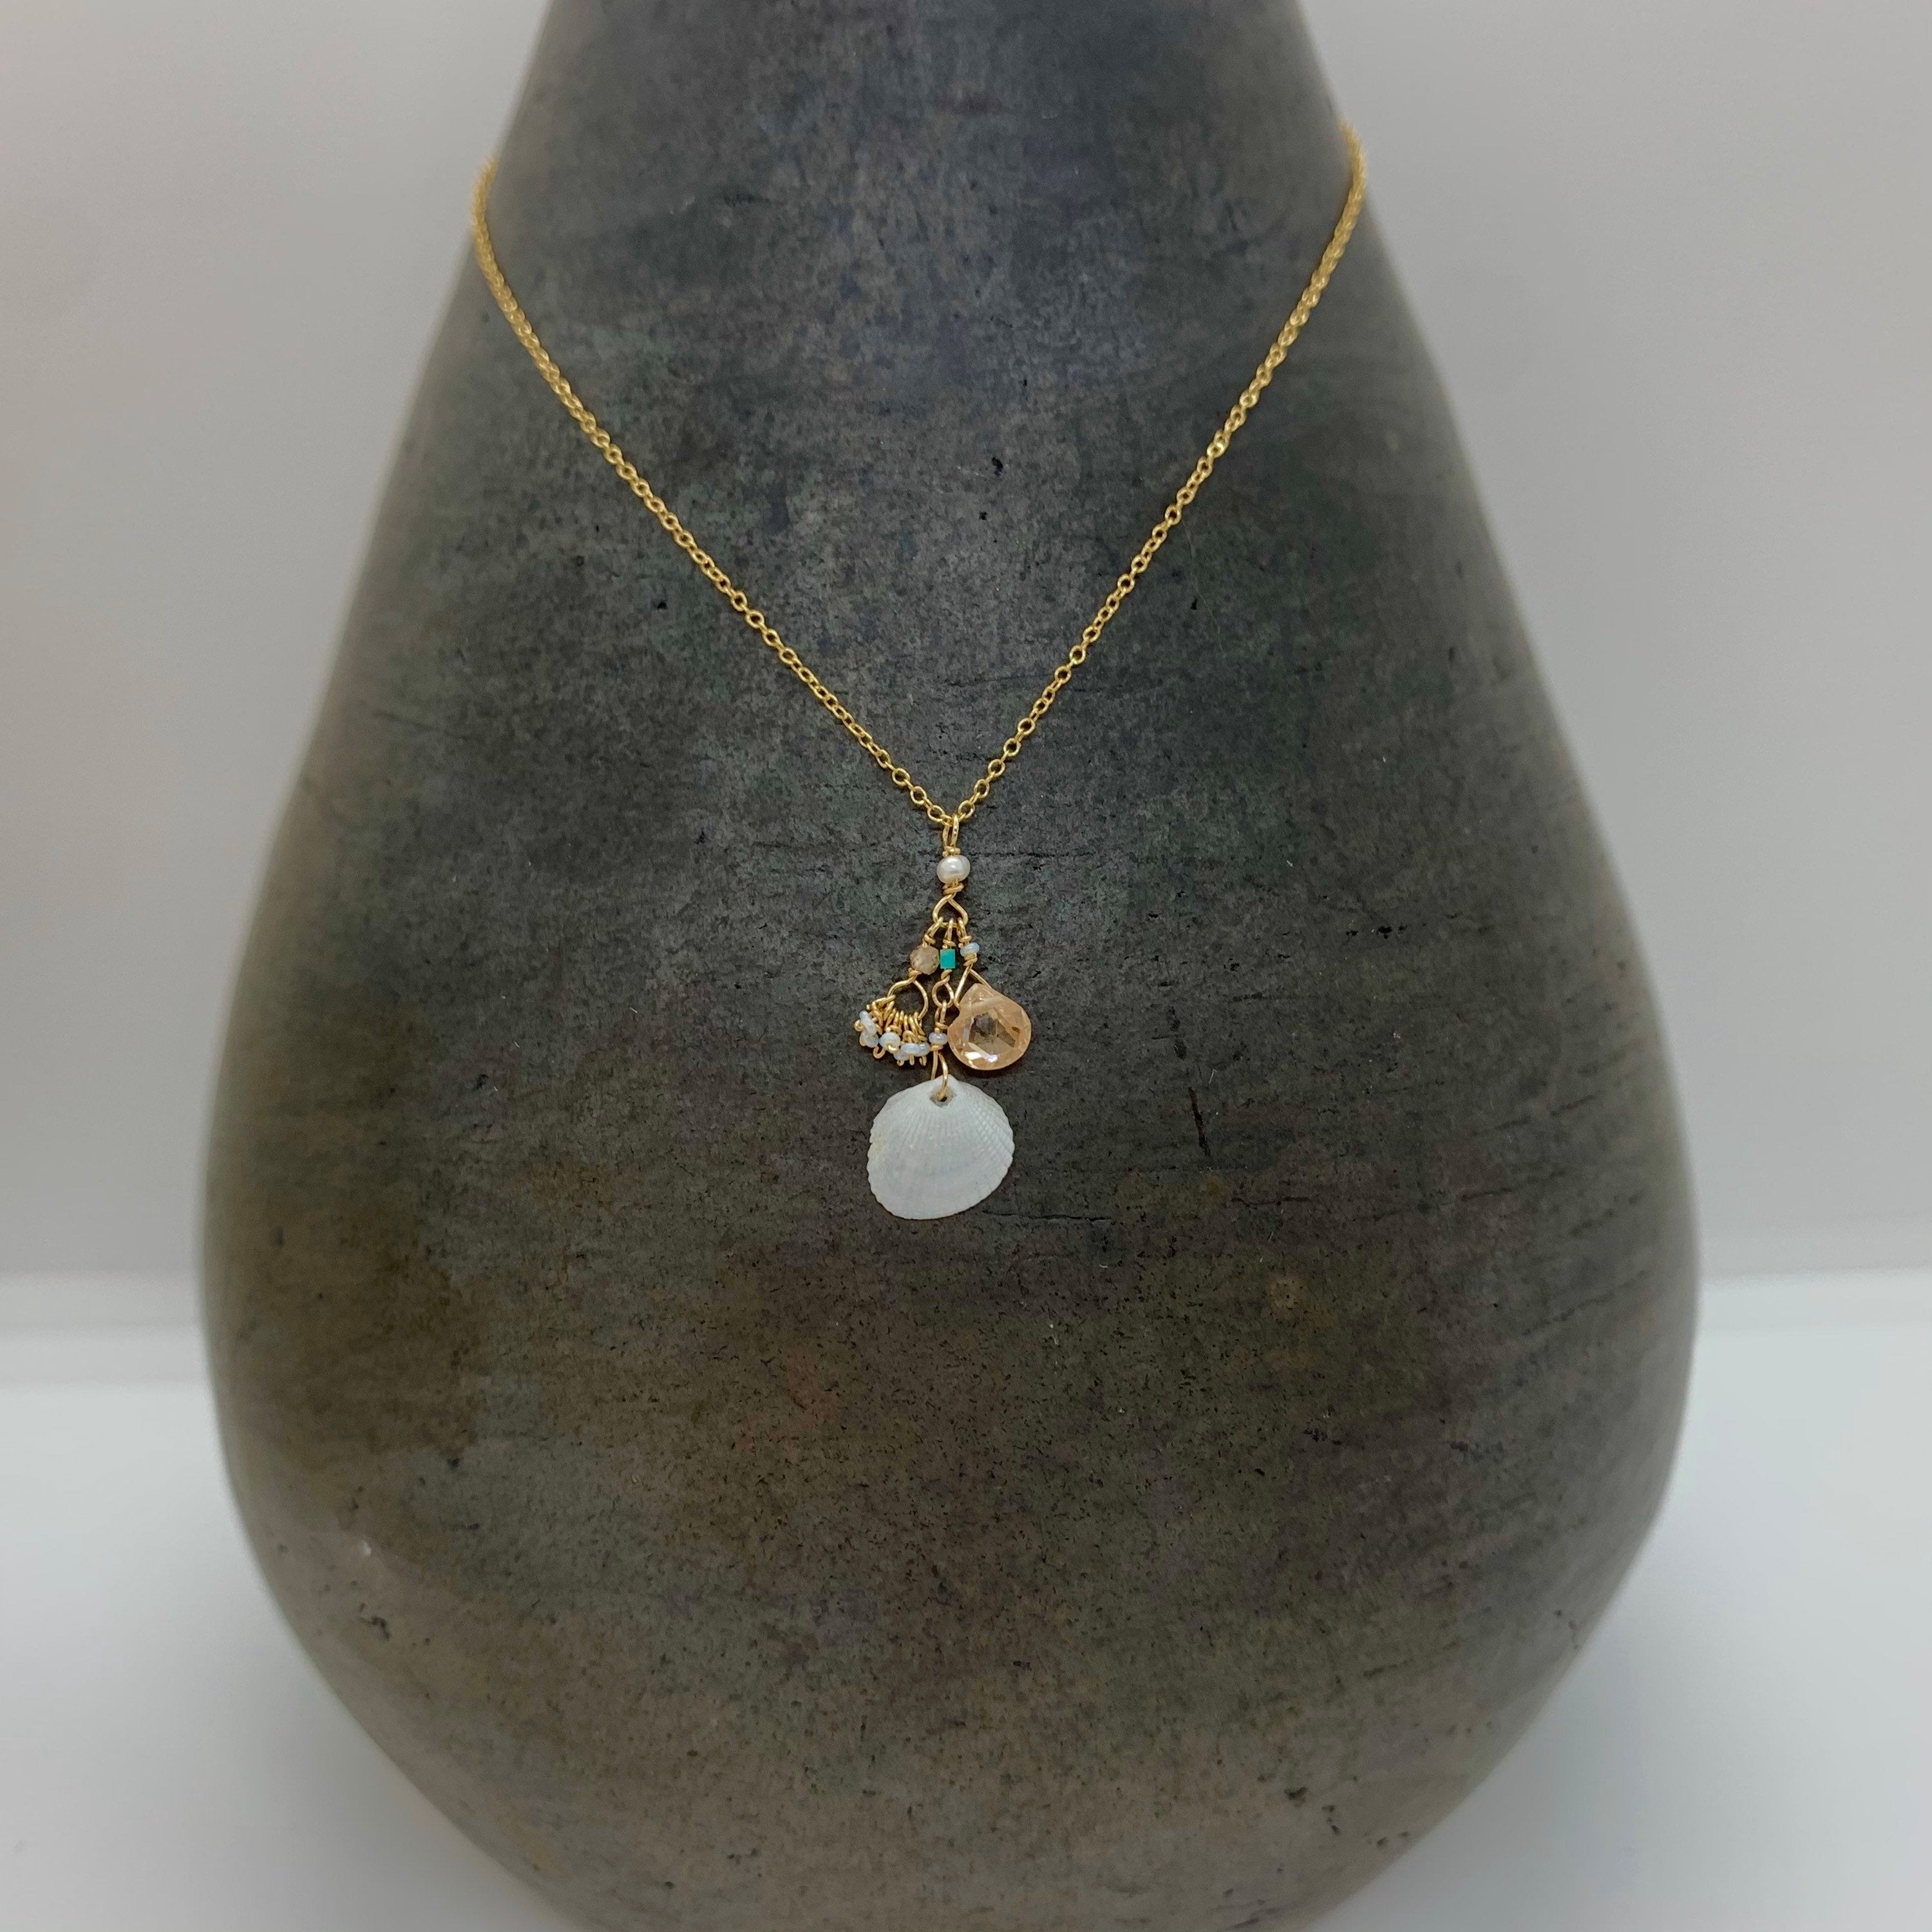 14k Gold Chain Necklace w/ Seashell, Cubic Zirconia, Quartz, Turquoise, Freshwater Pearl & Antique Italian Beads